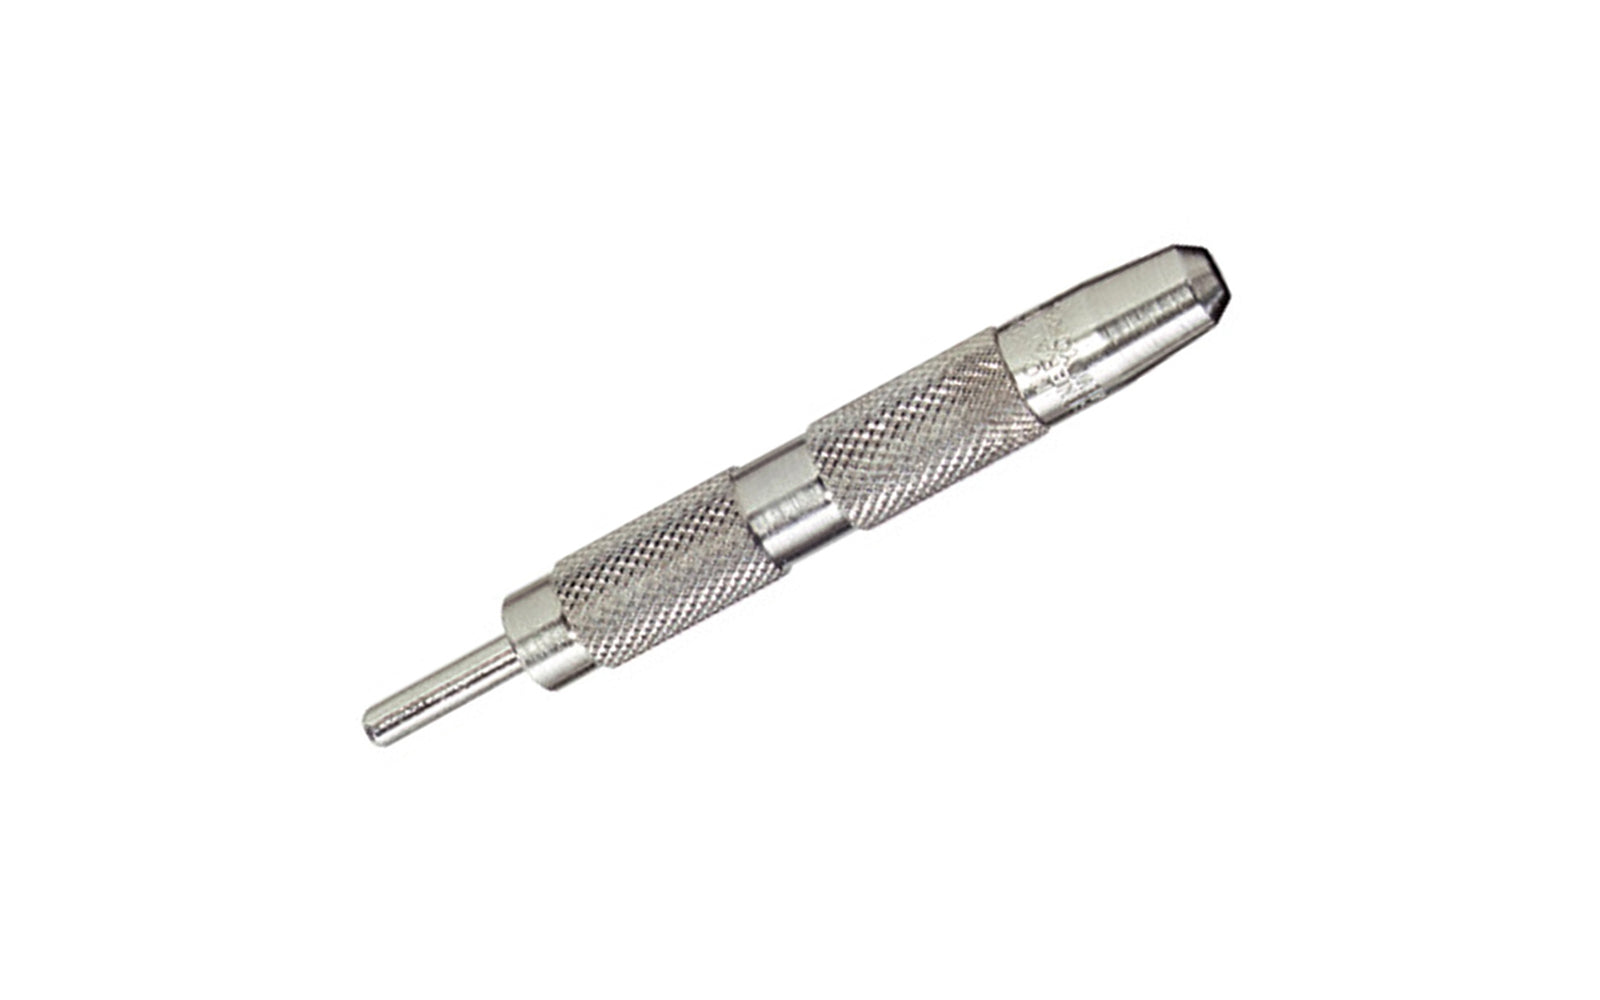 Jiffy Centering Punch - Model No. 806 ~ Ideal for quickly starting screw holes when attaching countersunk hardware such as hinges, hasps, hangers & drawer pulls. Countersunk end ensures starting hole is centered in hardware screw hole ~ General Tools 038728240187